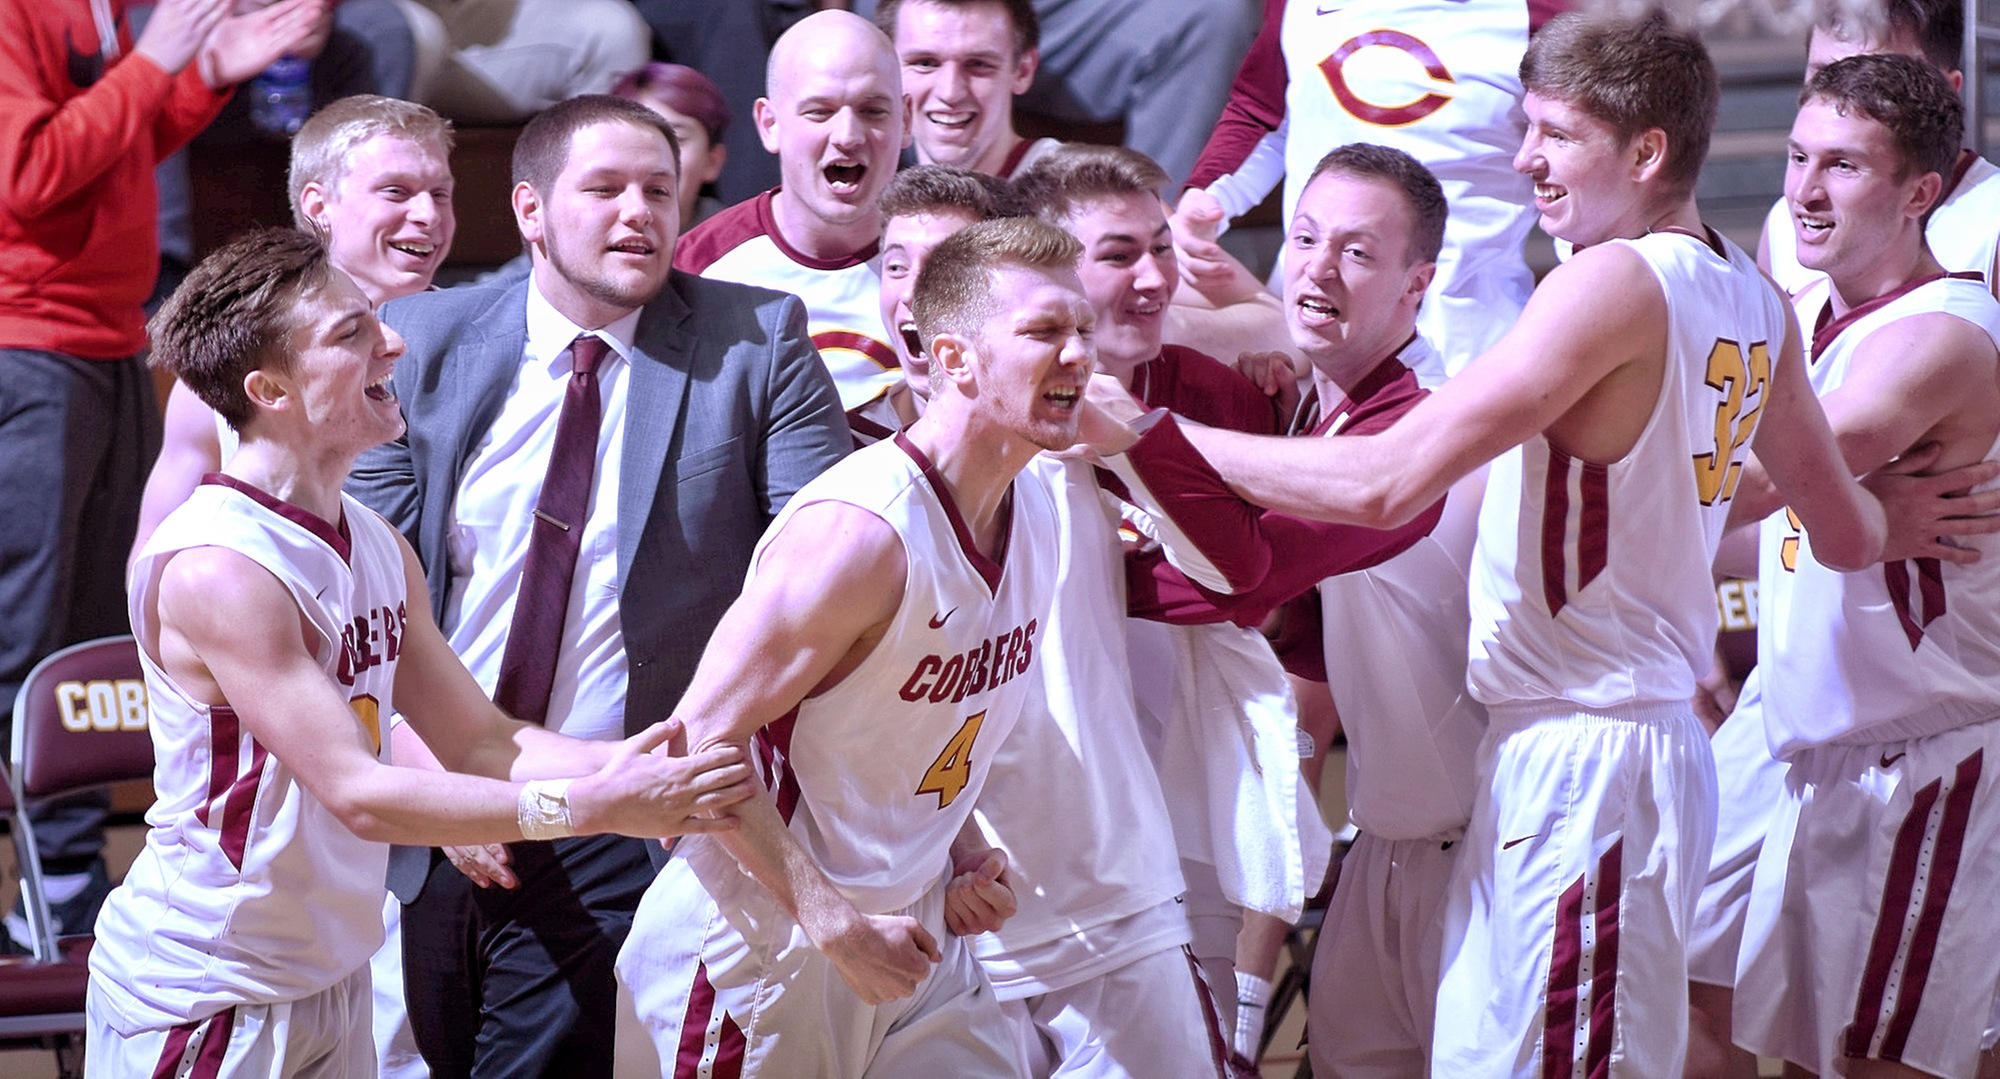 Collin Larson celebrates his game-winning half-court buzzer beater after the Cobbers' 79-76 win over Augsburg.